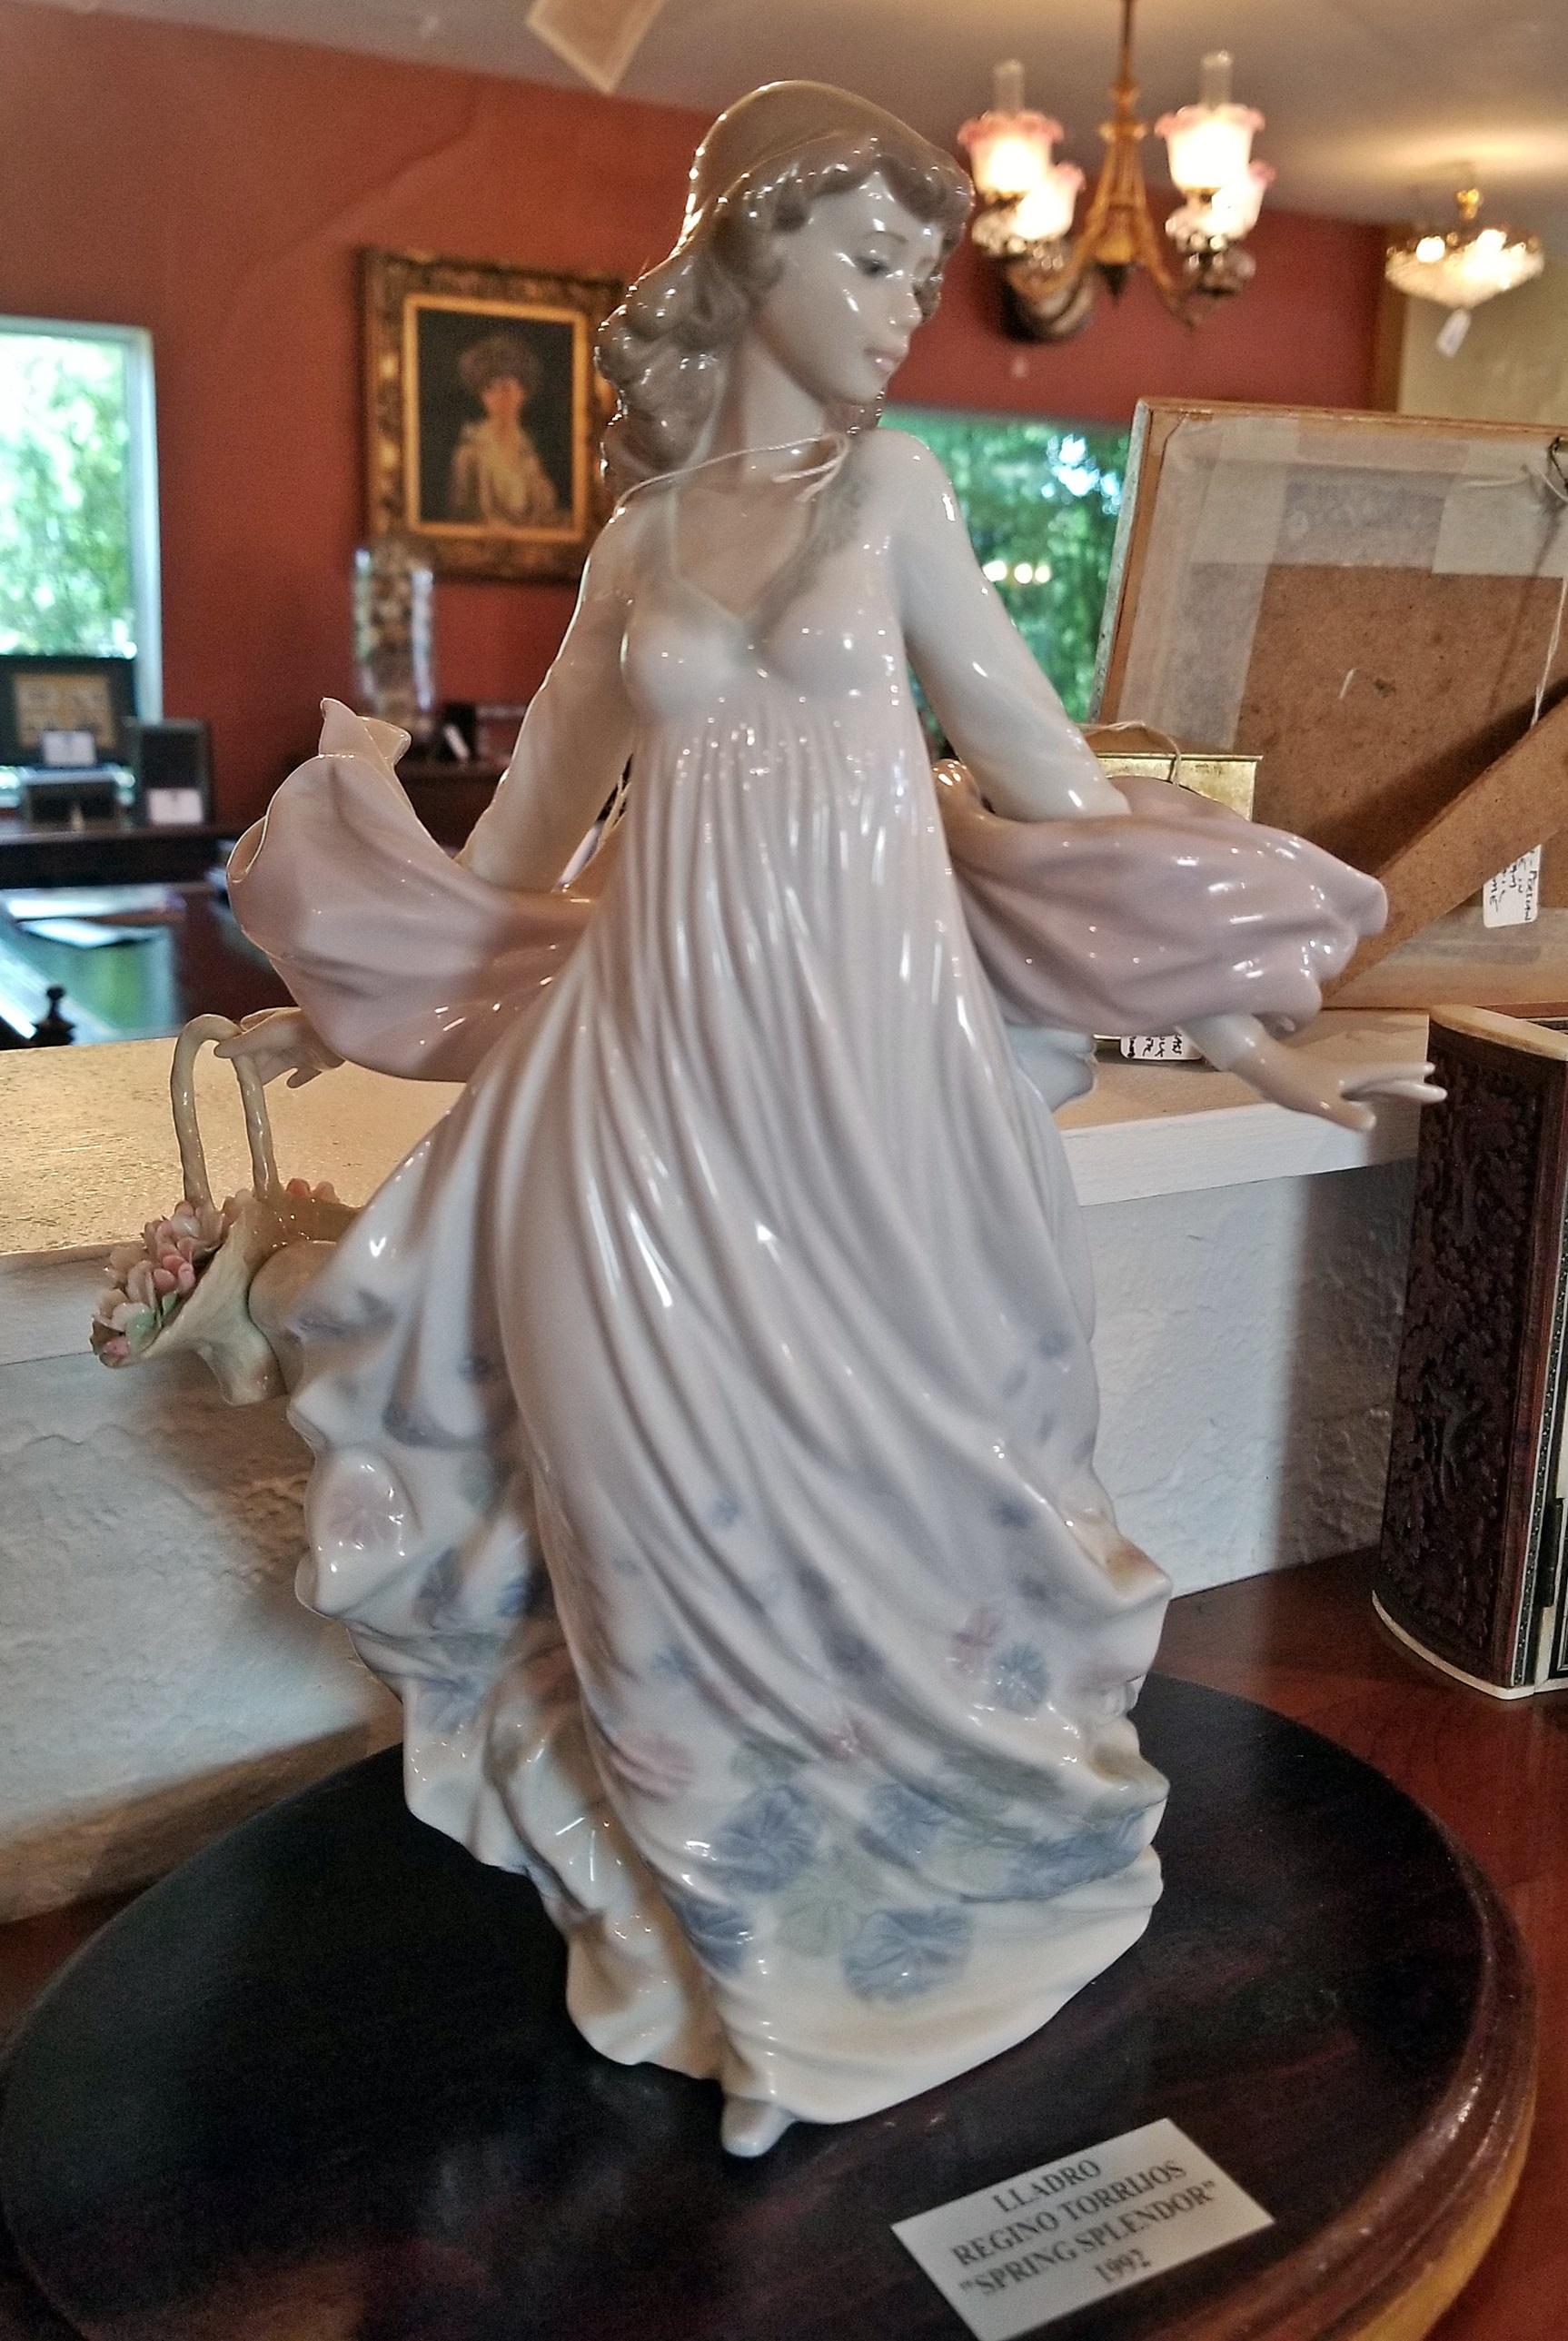 Gorgeous Lladro figurine……Spanish porcelain at its best and most collectible !!

Fully marked.

This Model 5898 A130 was first produced by Lladro in 1992 and the Sculptor was Regino Torrijos.

It was Retired in 2001.

The figurine is of a